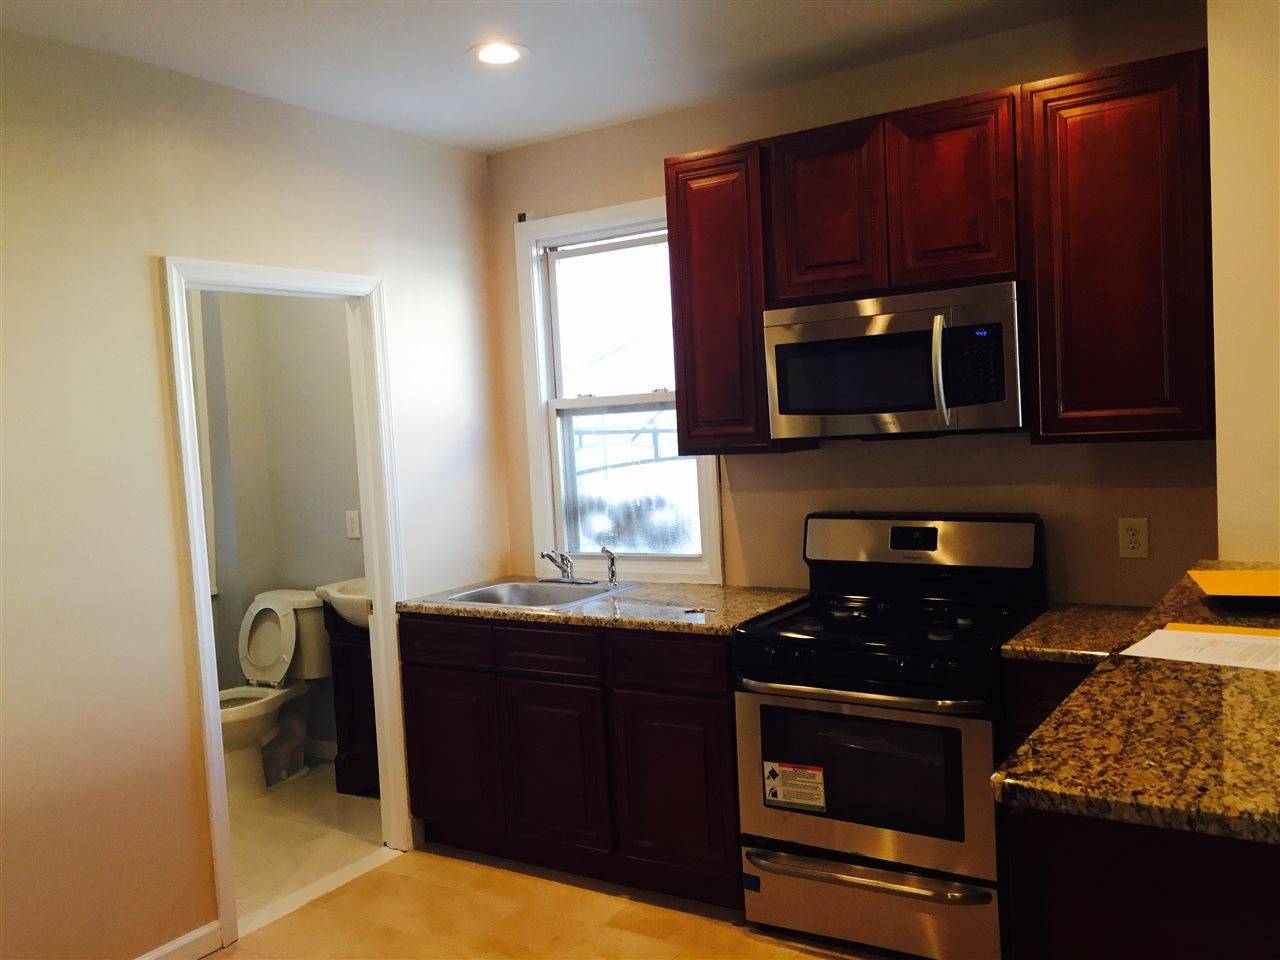 Beautifully renovated 1 BR apartment in highly sought after Jersey City Heights